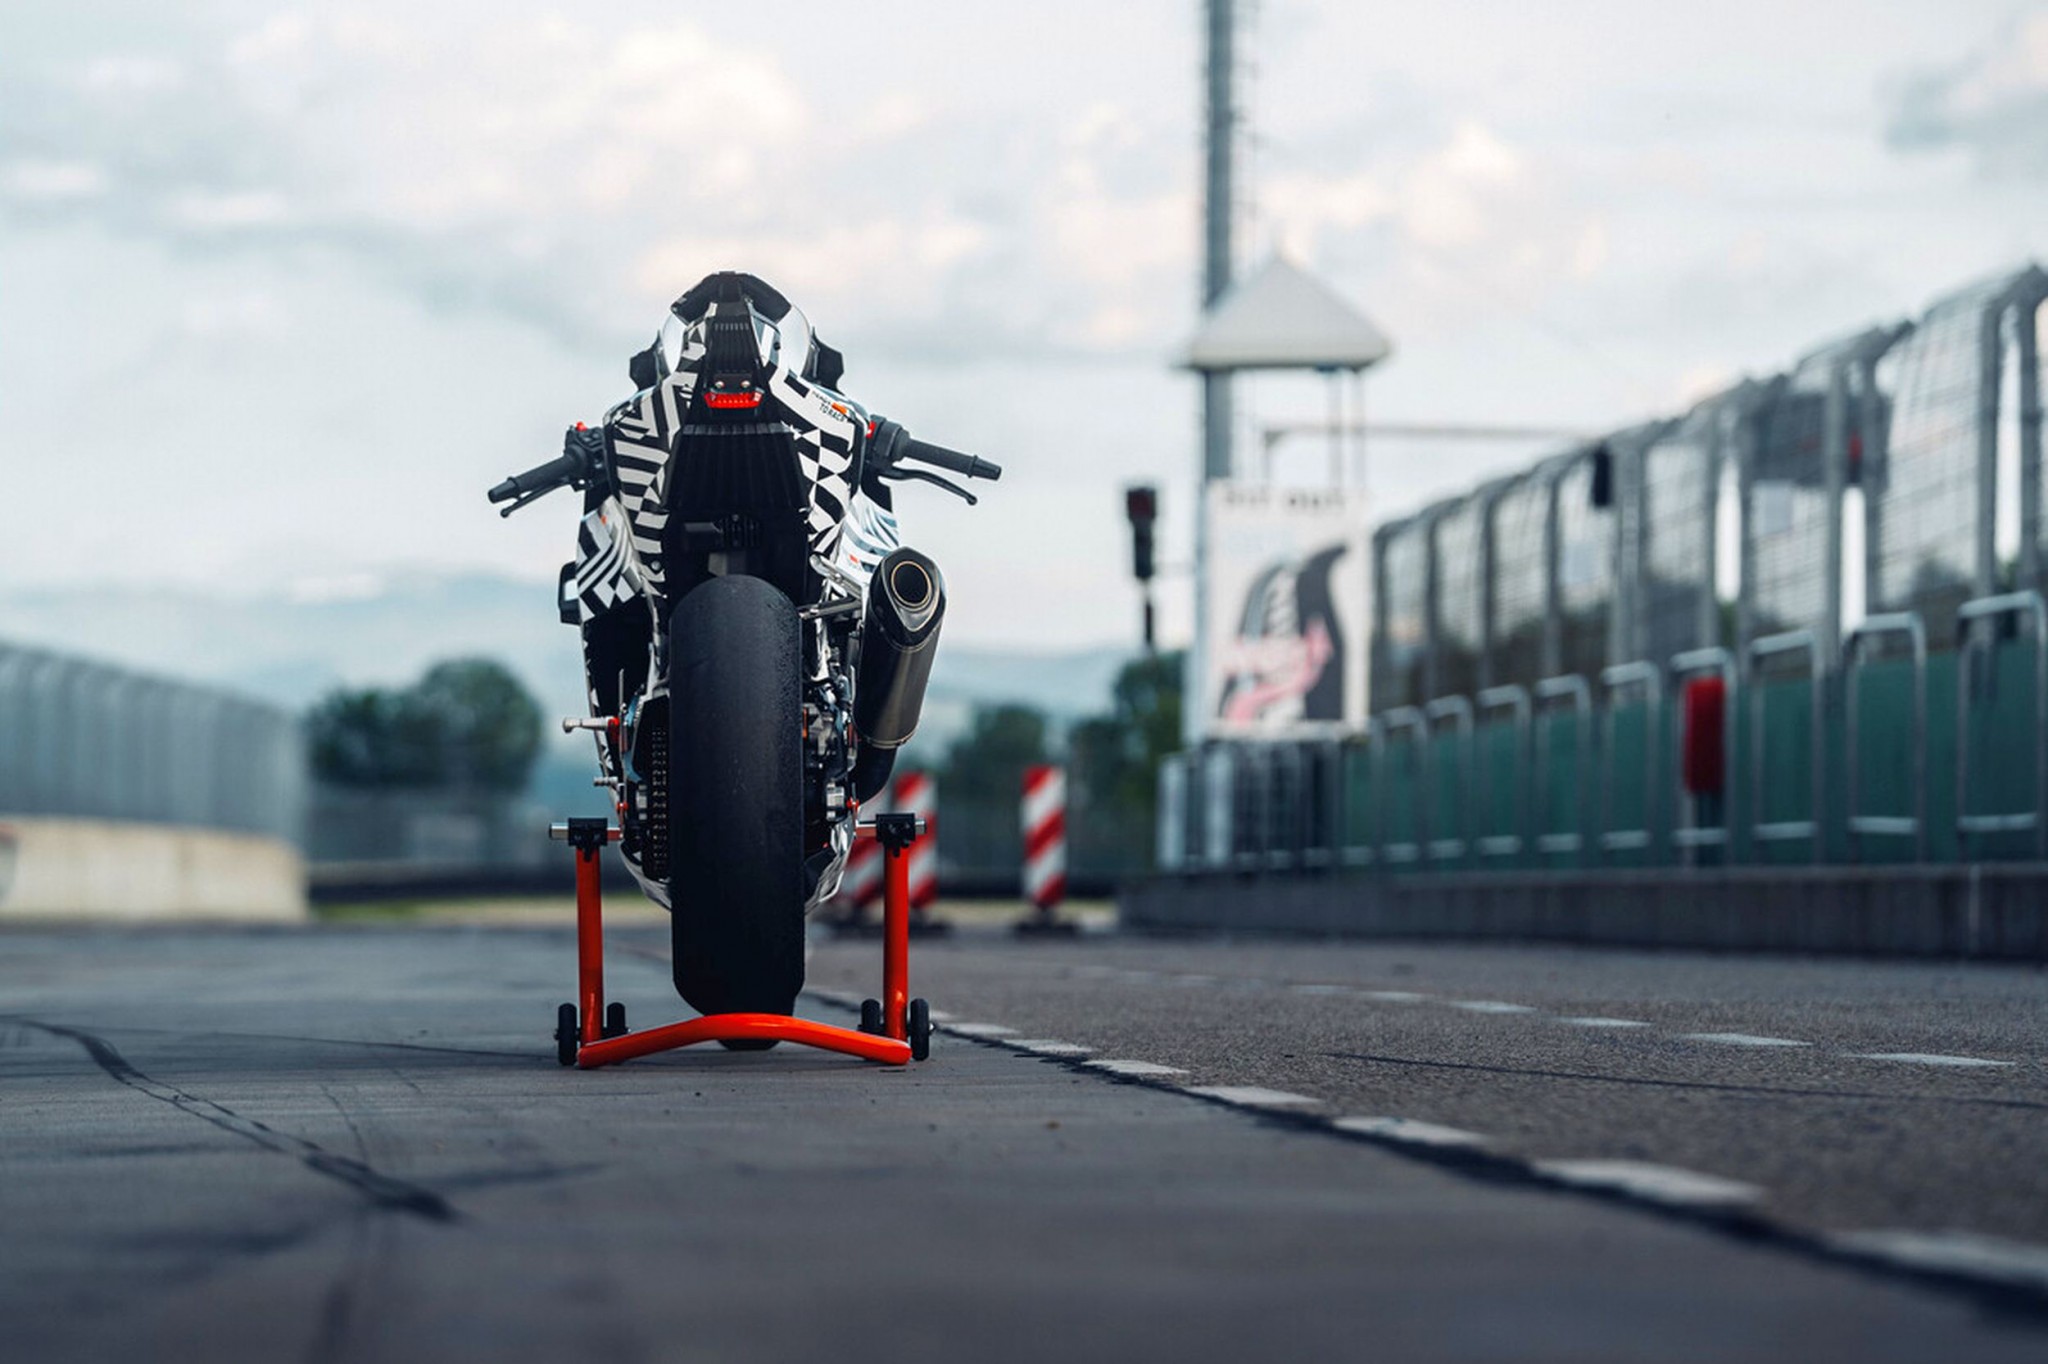 KTM 990 RC R - finally the thoroughbred sports bike for the road! - Image 2